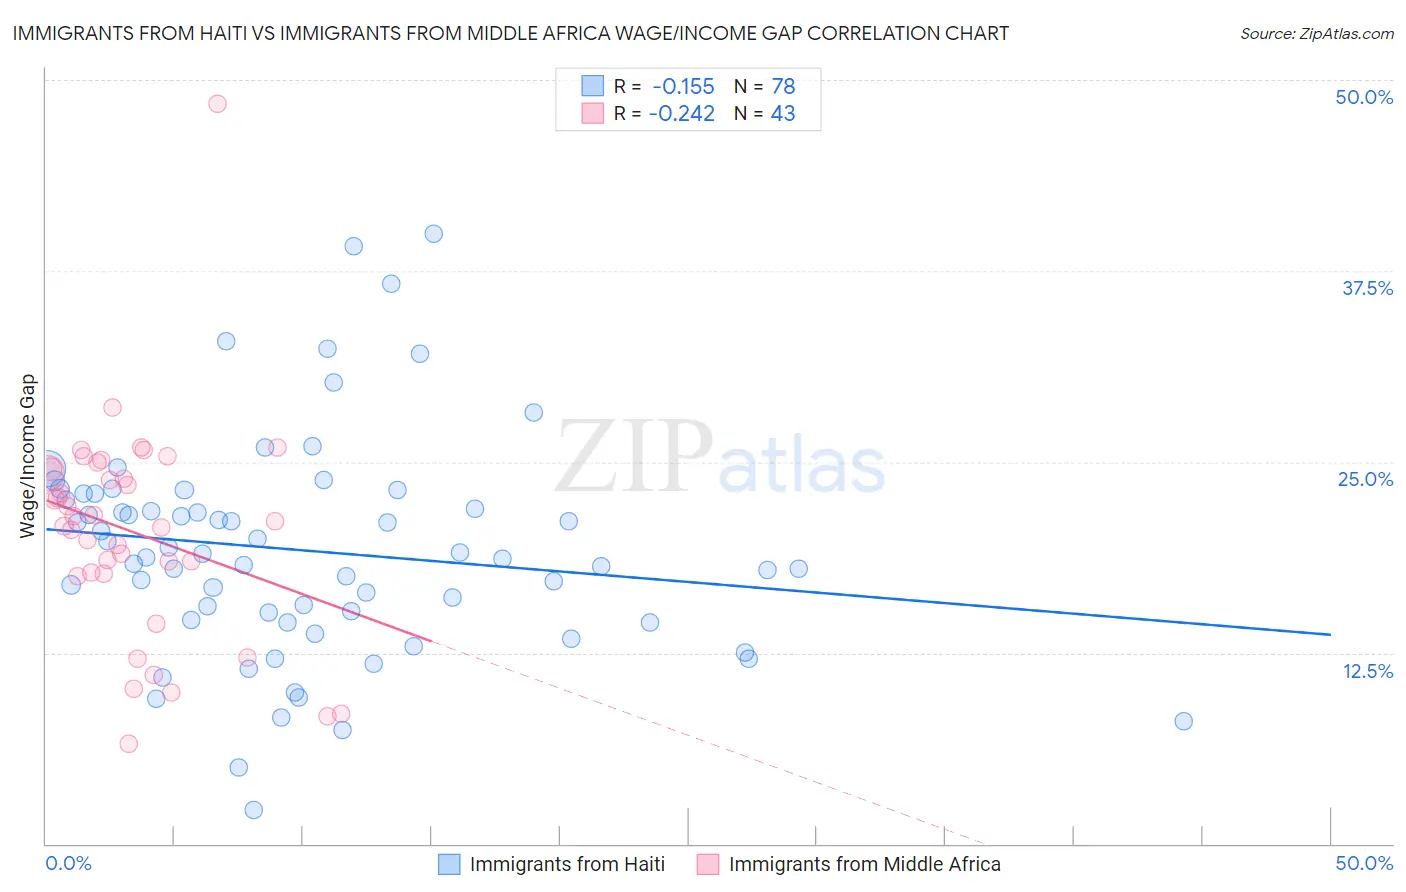 Immigrants from Haiti vs Immigrants from Middle Africa Wage/Income Gap